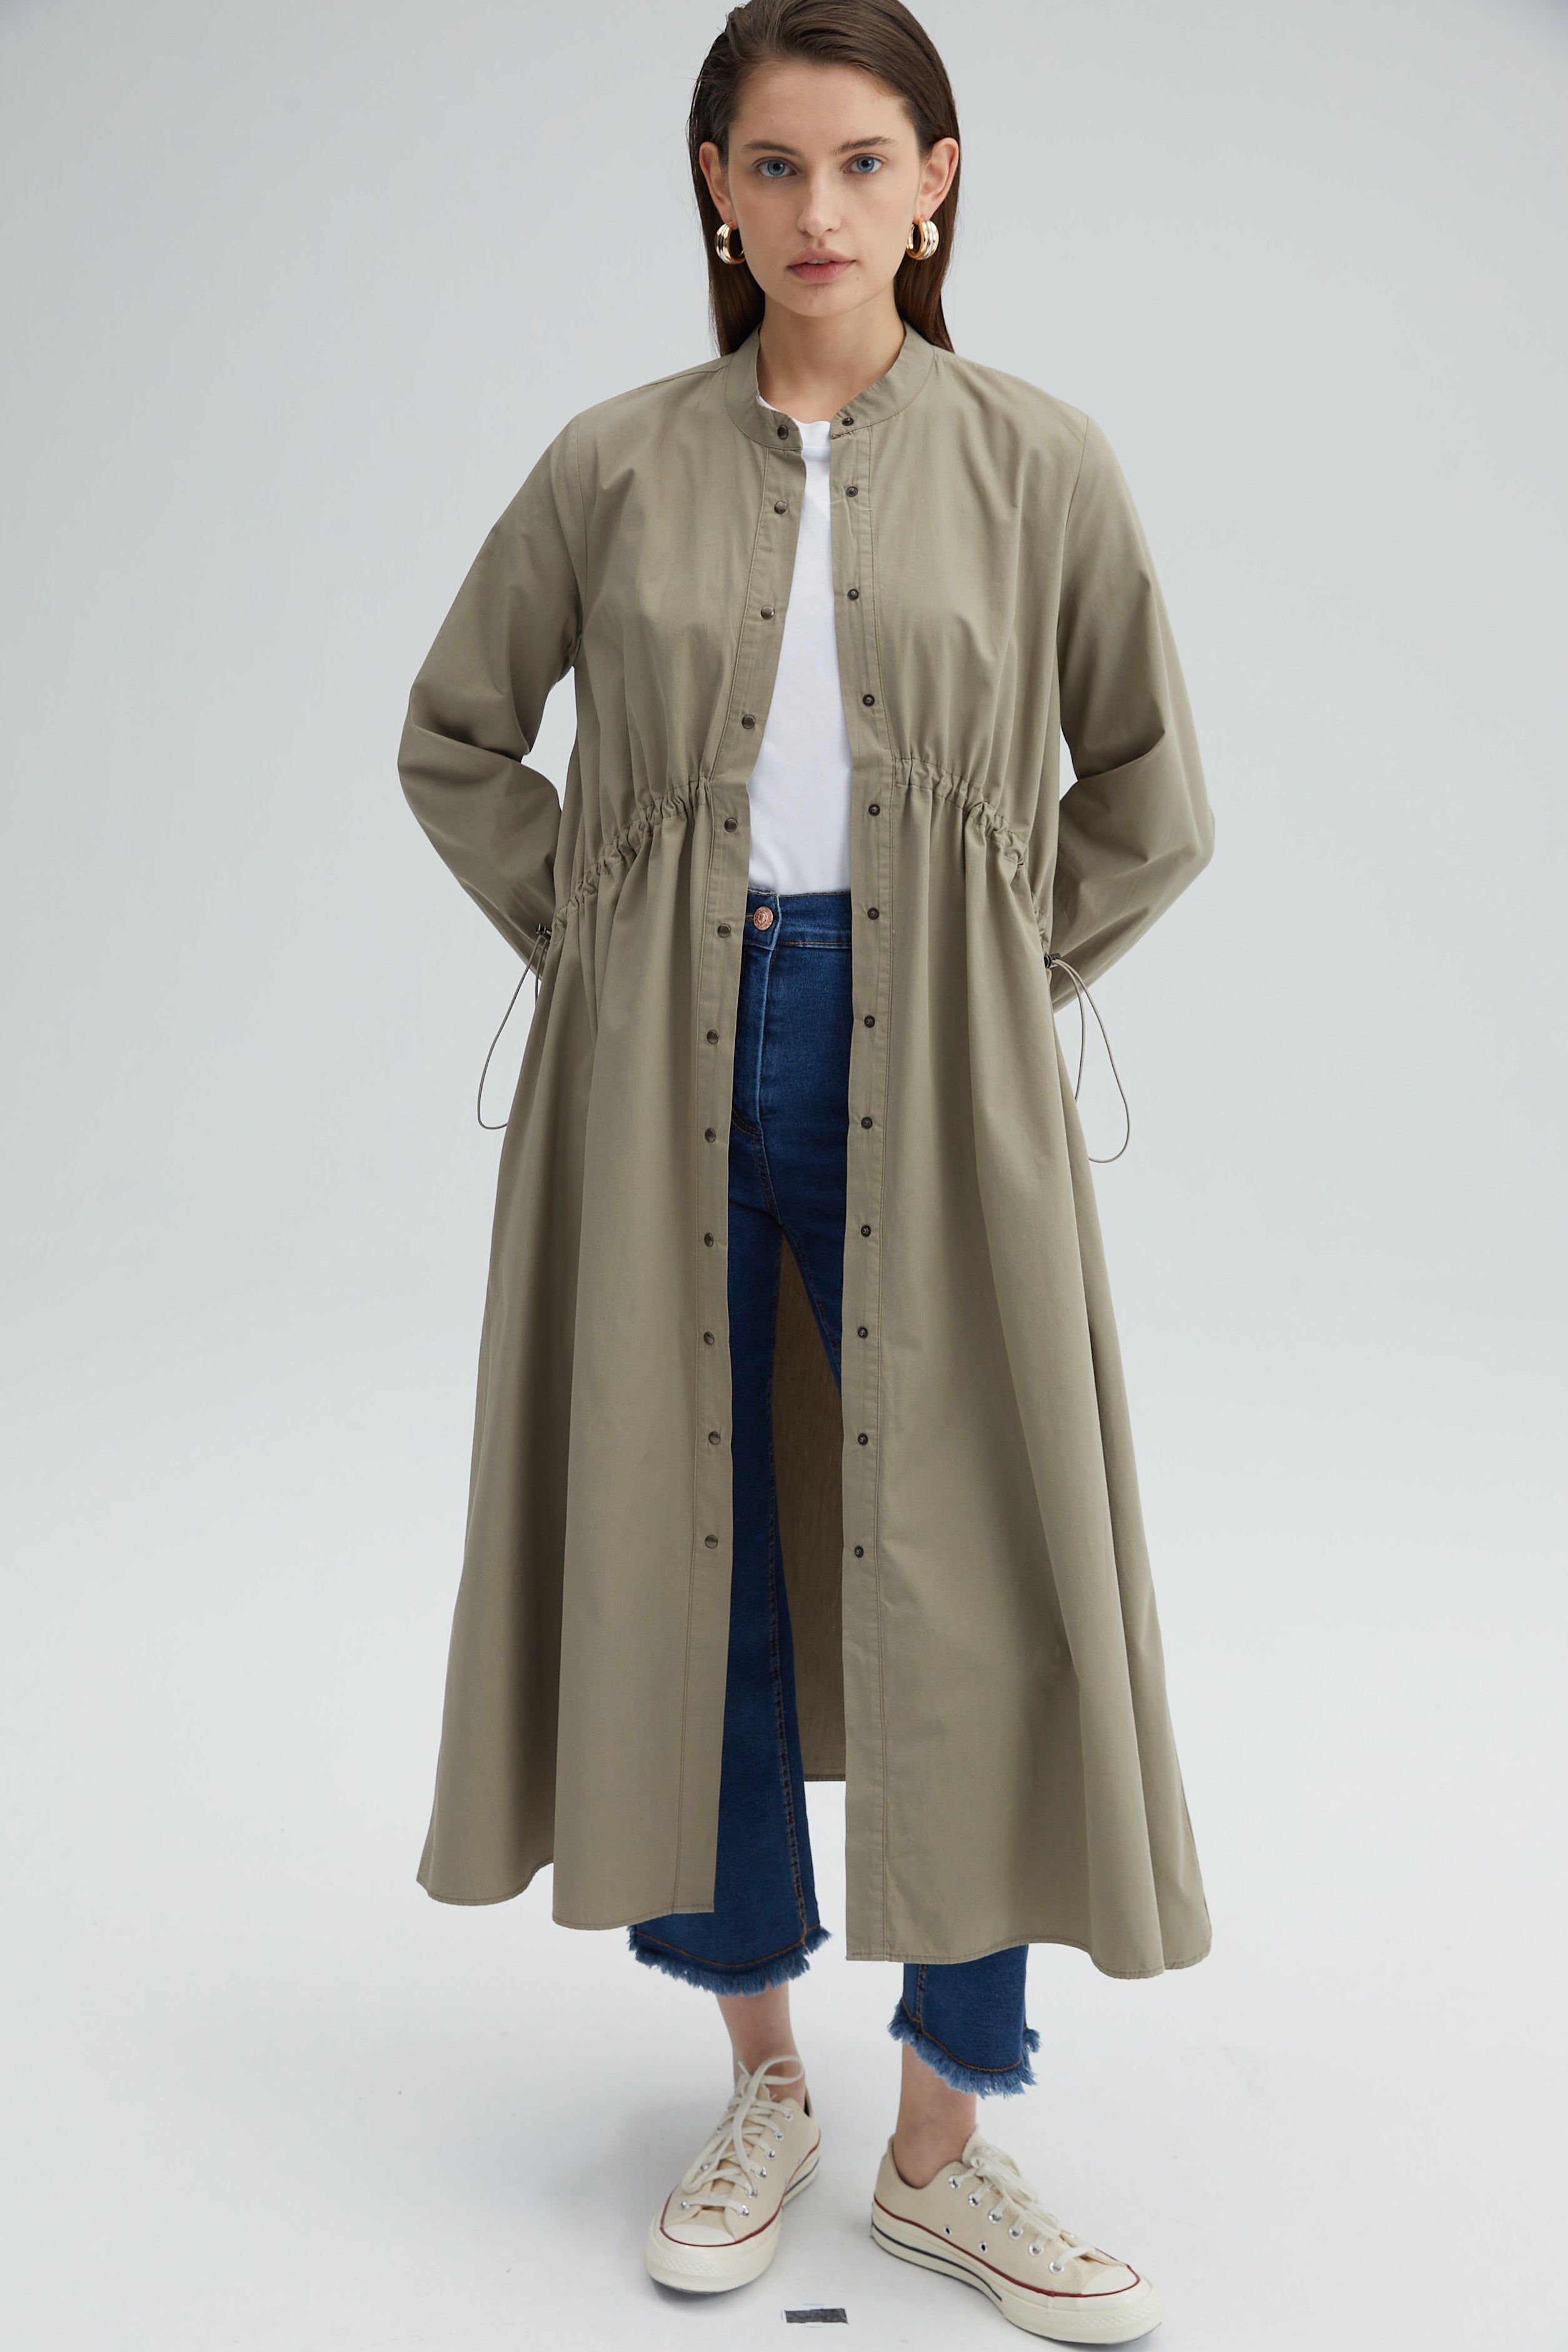 A model wears TOU10805 - Waisted Quilted Oversize Trenchcoat - Khaki, wholesale Trenchcoat of Touche Prive to display at Lonca